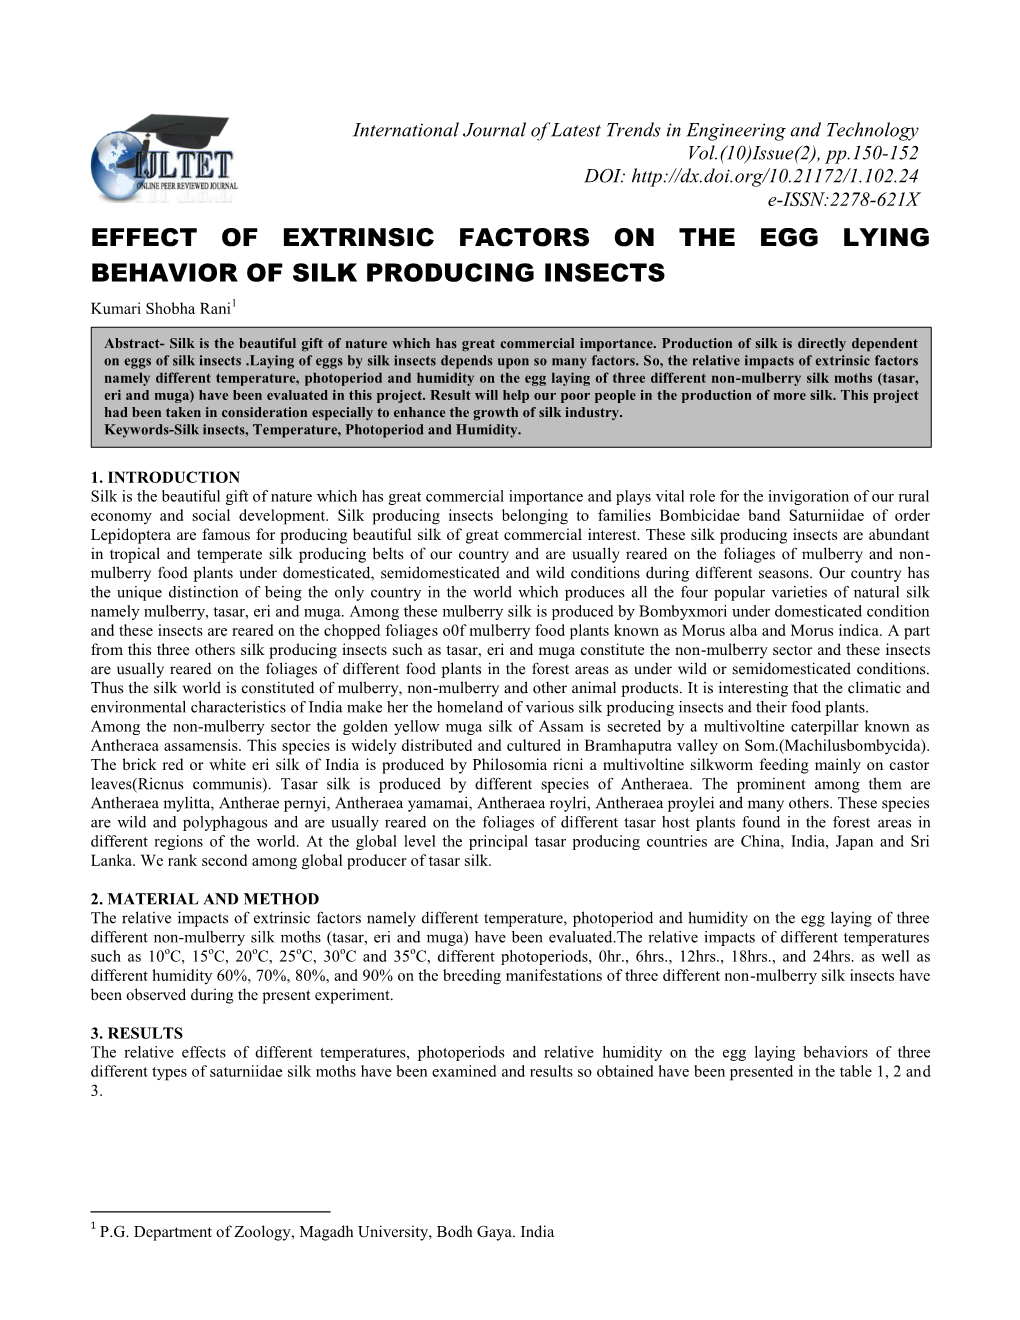 Effect of Extrinsic Factors on the Egg Lying Behavior of Silk Producing Insects